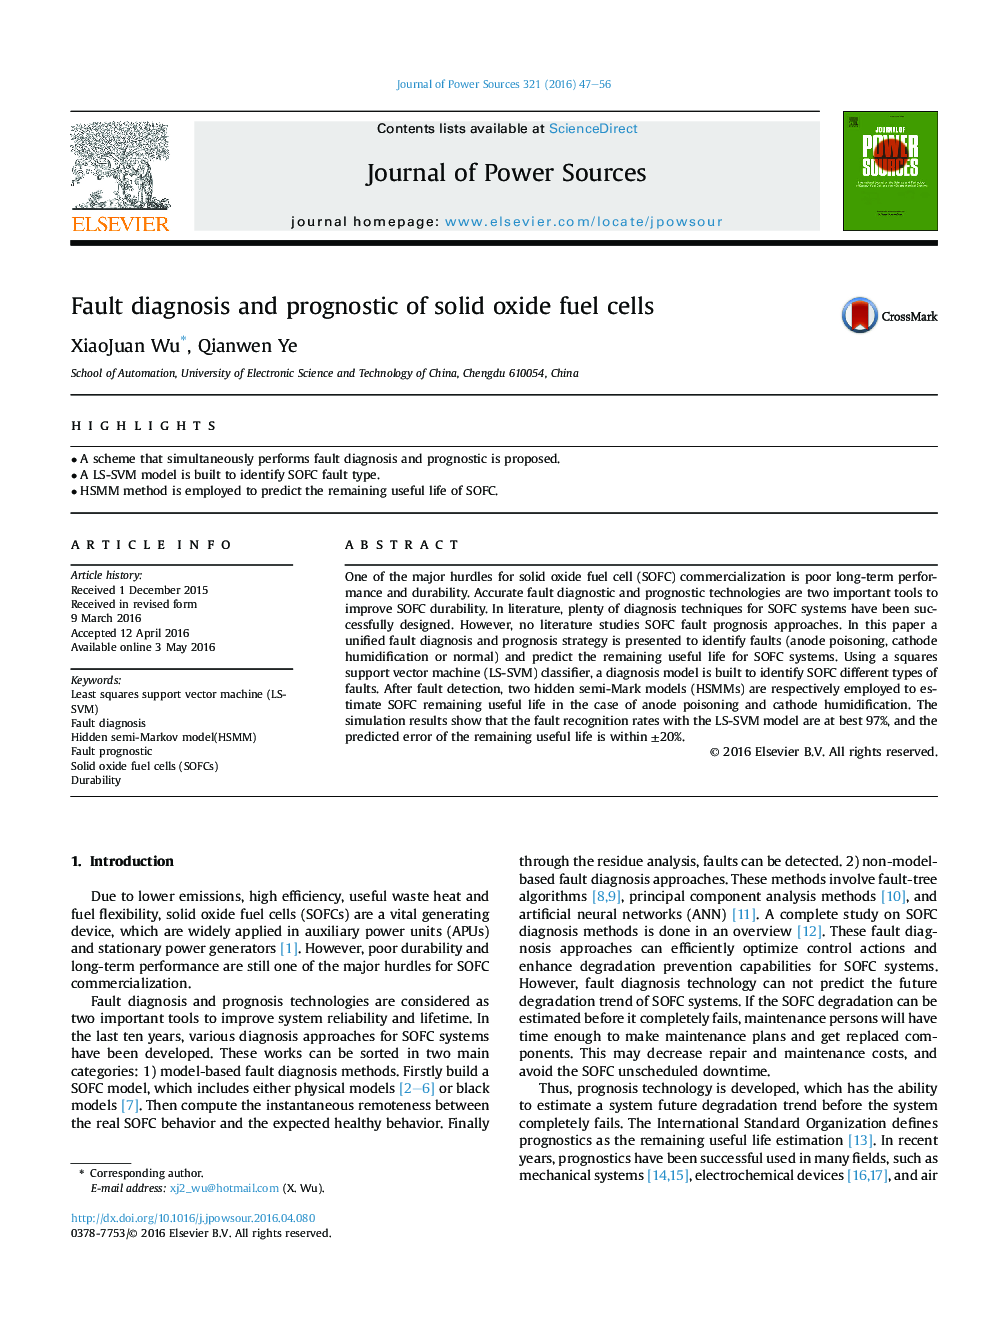 Fault diagnosis and prognostic of solid oxide fuel cells